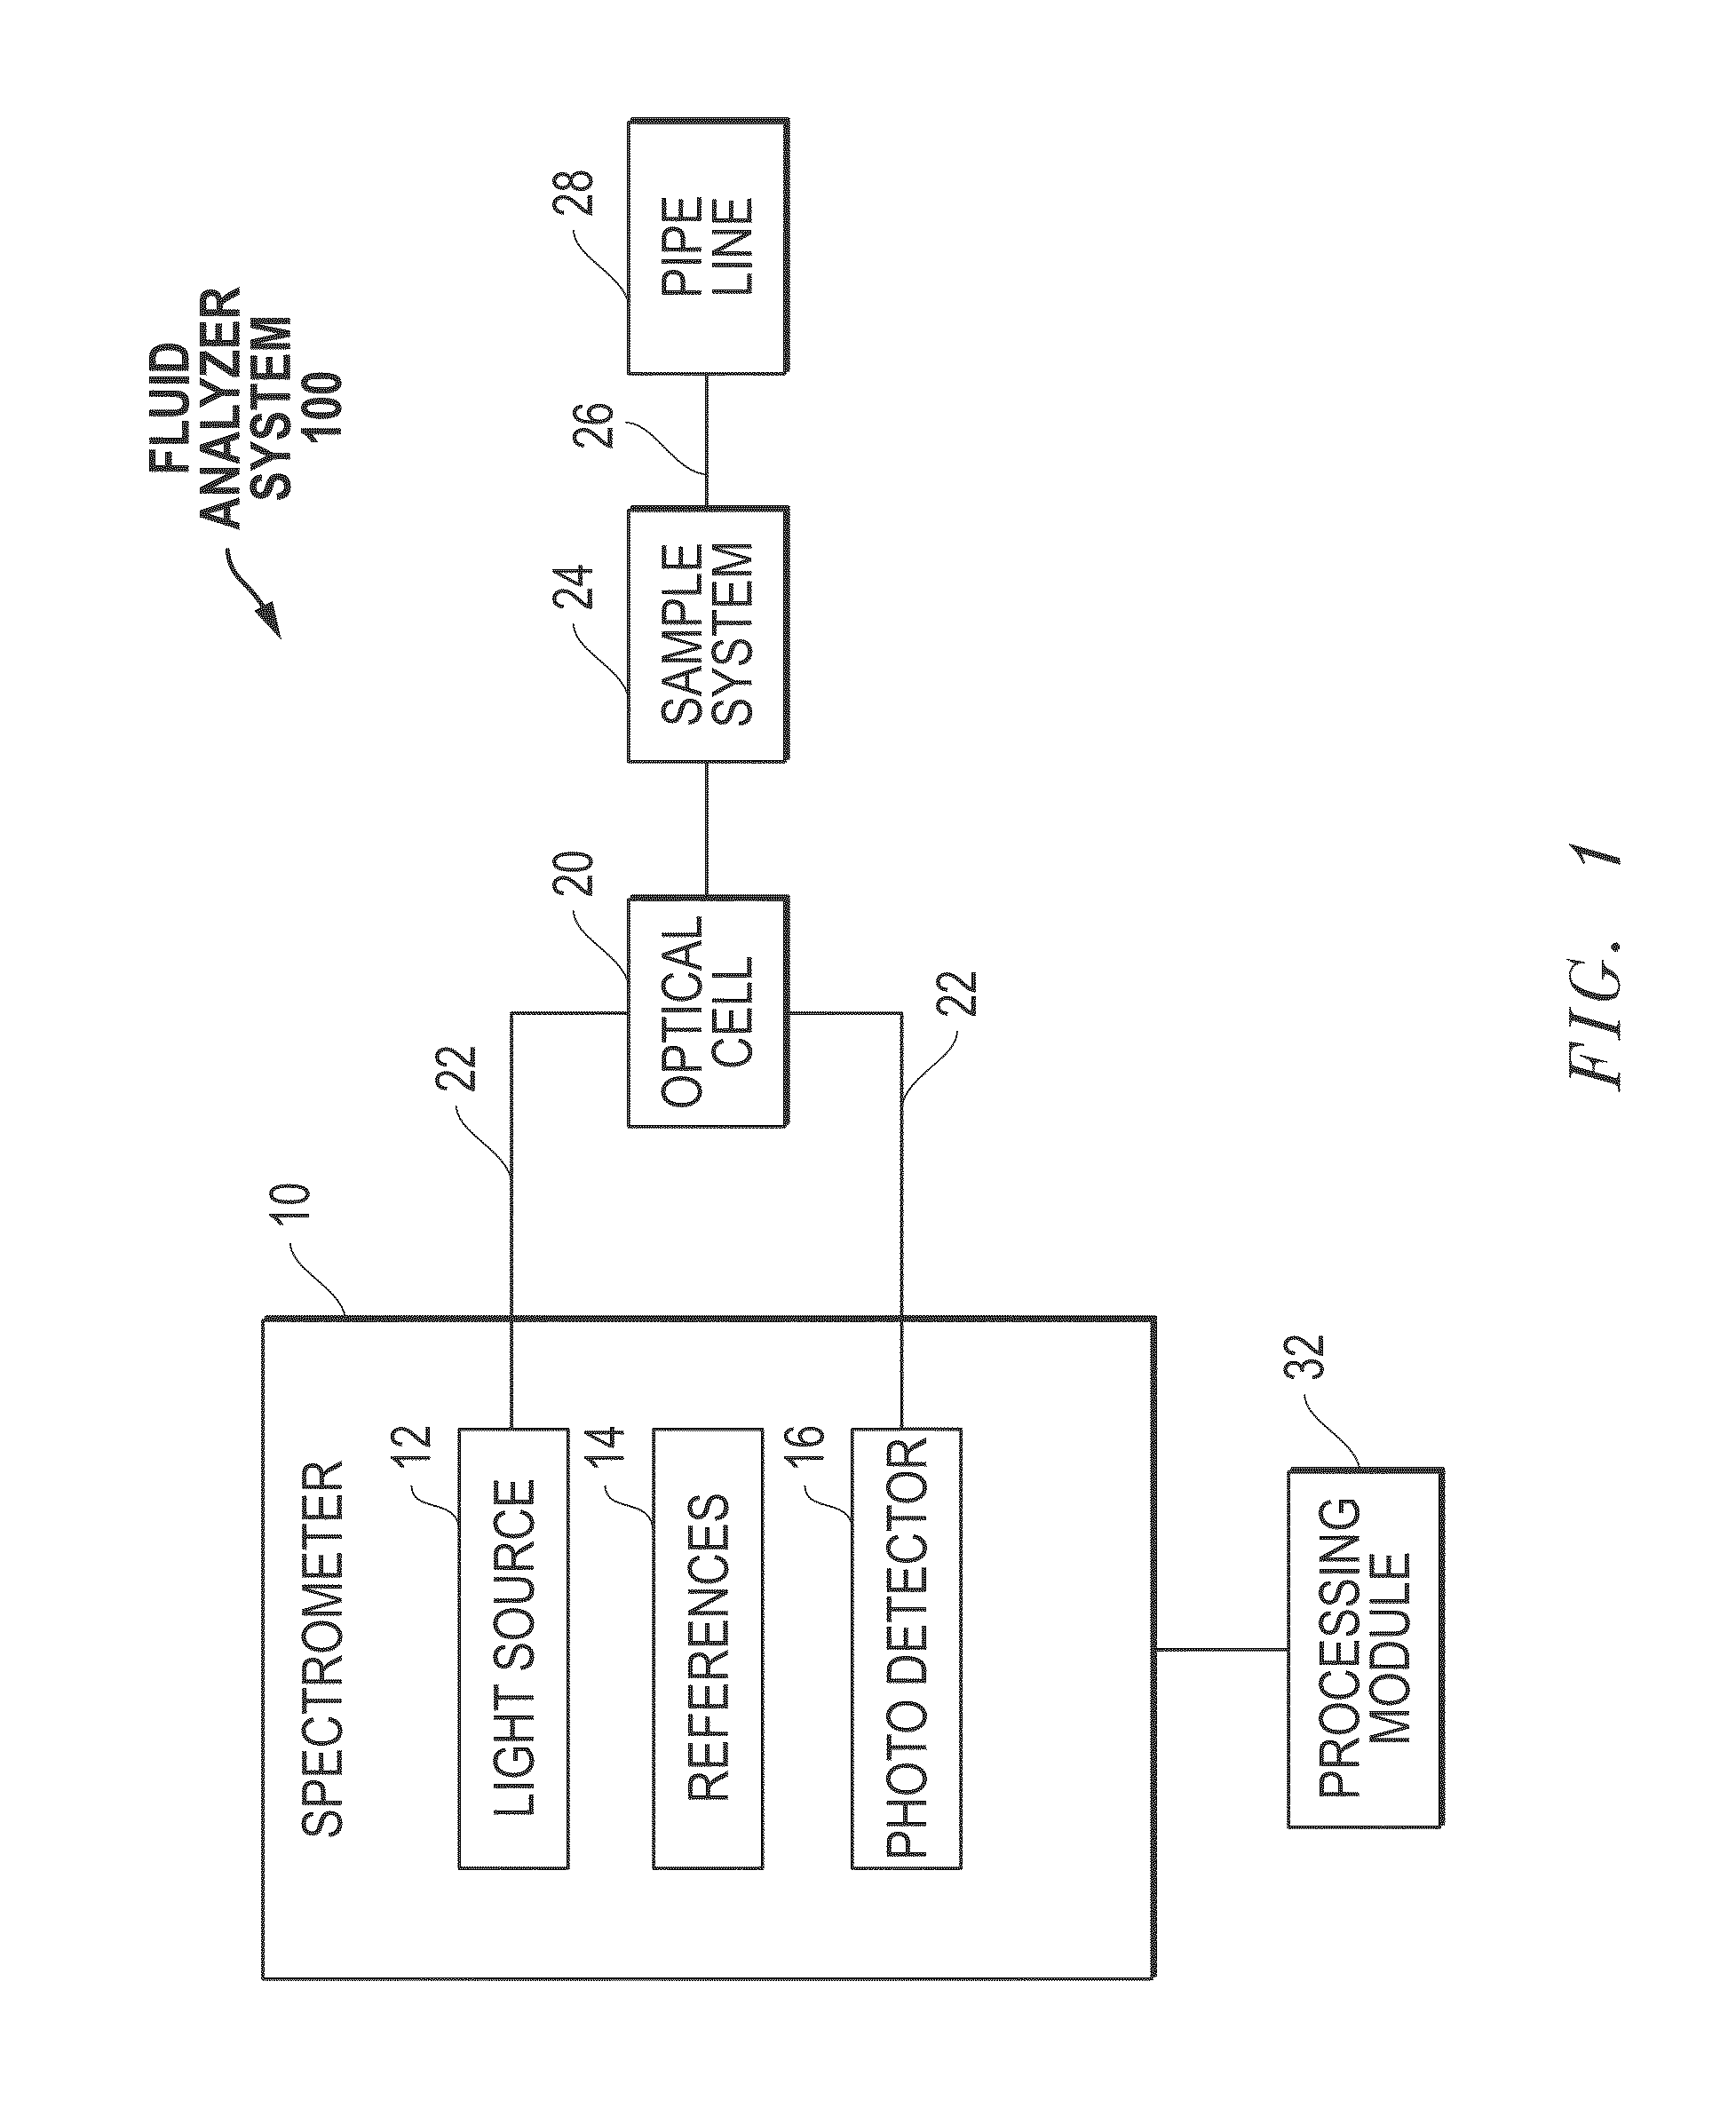 System and method for determining vapor pressure of produced hydrocarbon streams via spectroscopy